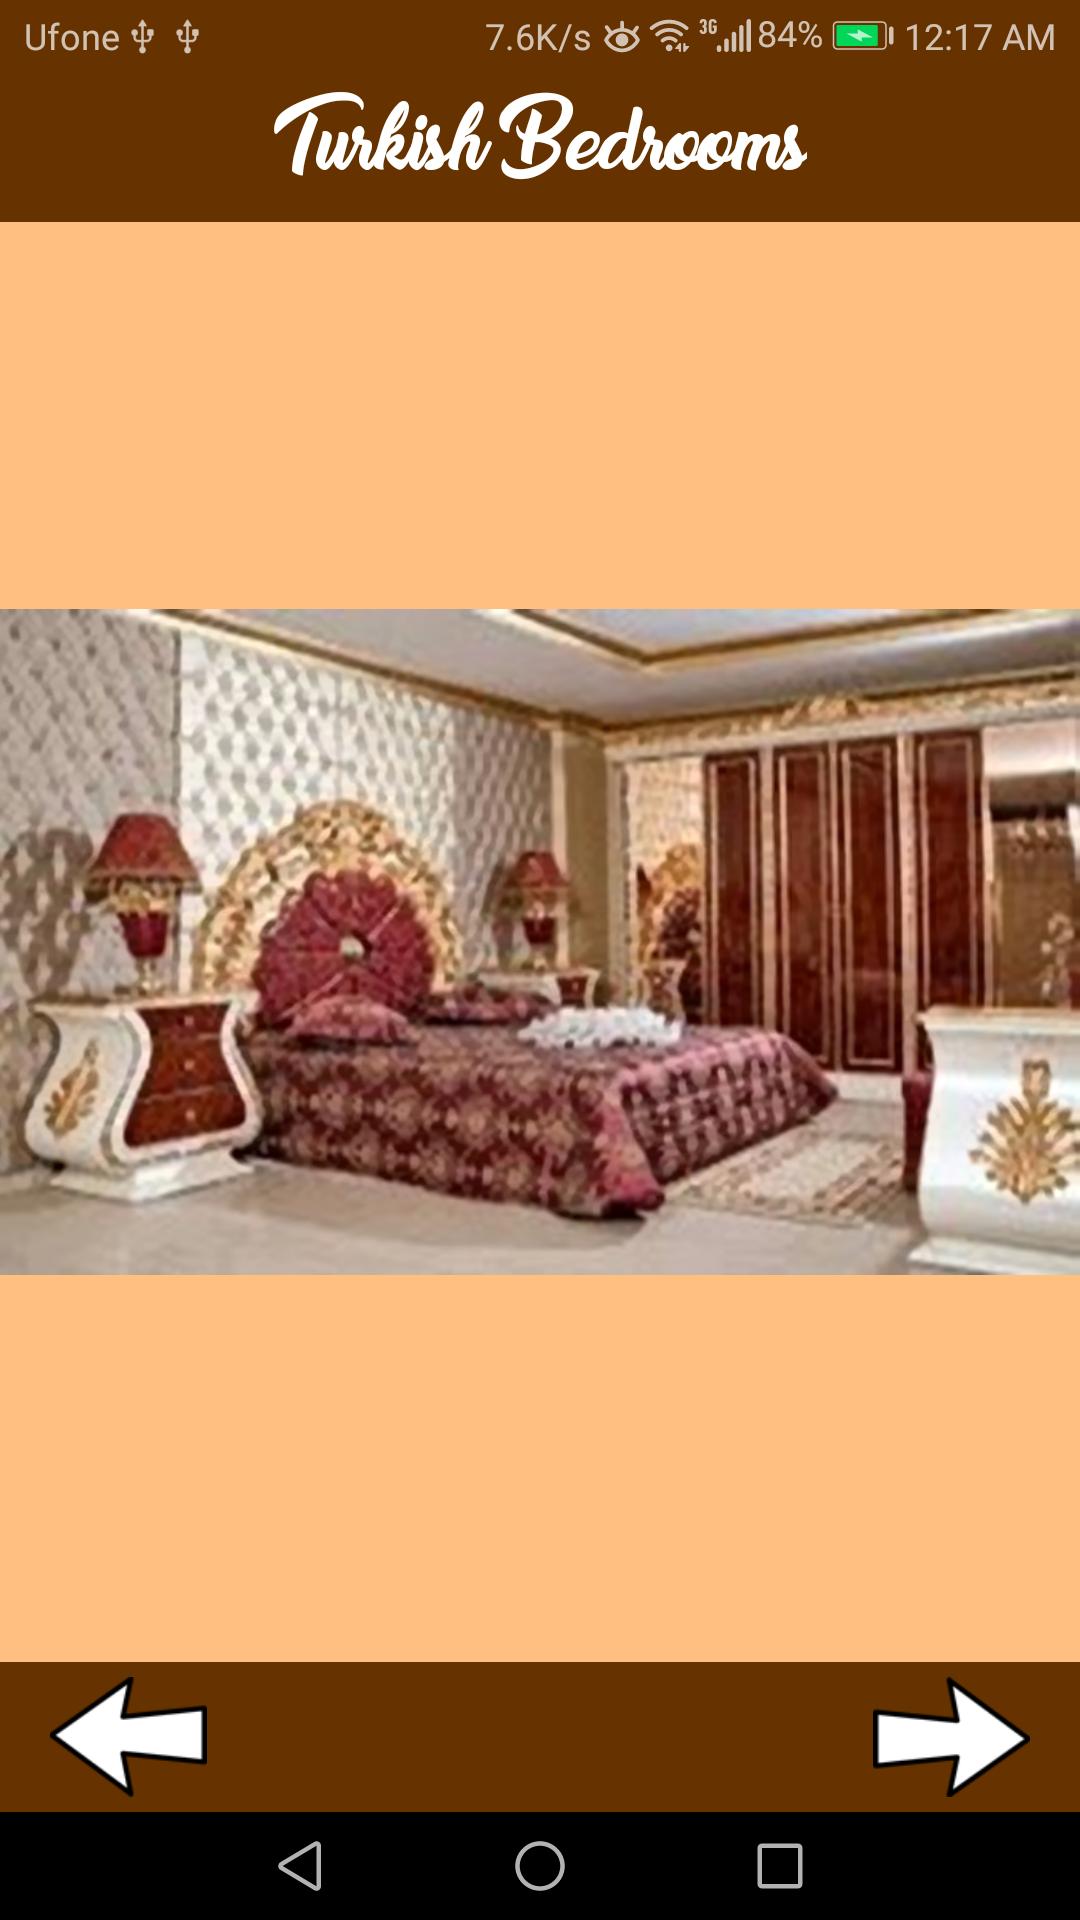 Turkish Bedroom Interior Designs For Android Apk Download